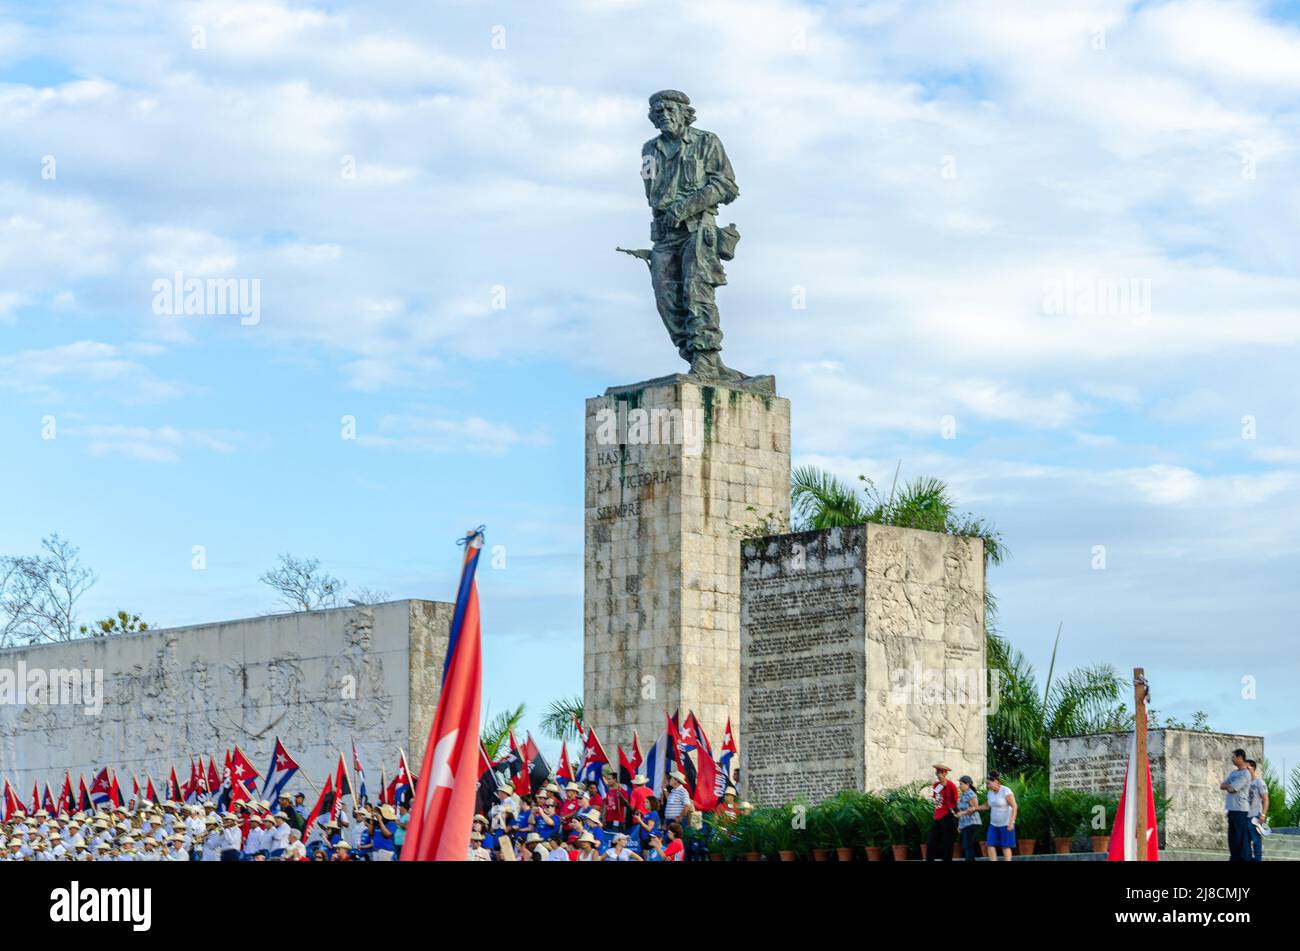 Main tribune below the Che sculpture. The traditional May Day or Workers Day celebrations are held annually in the Che Guevara Revolution Square and M Stock Photo